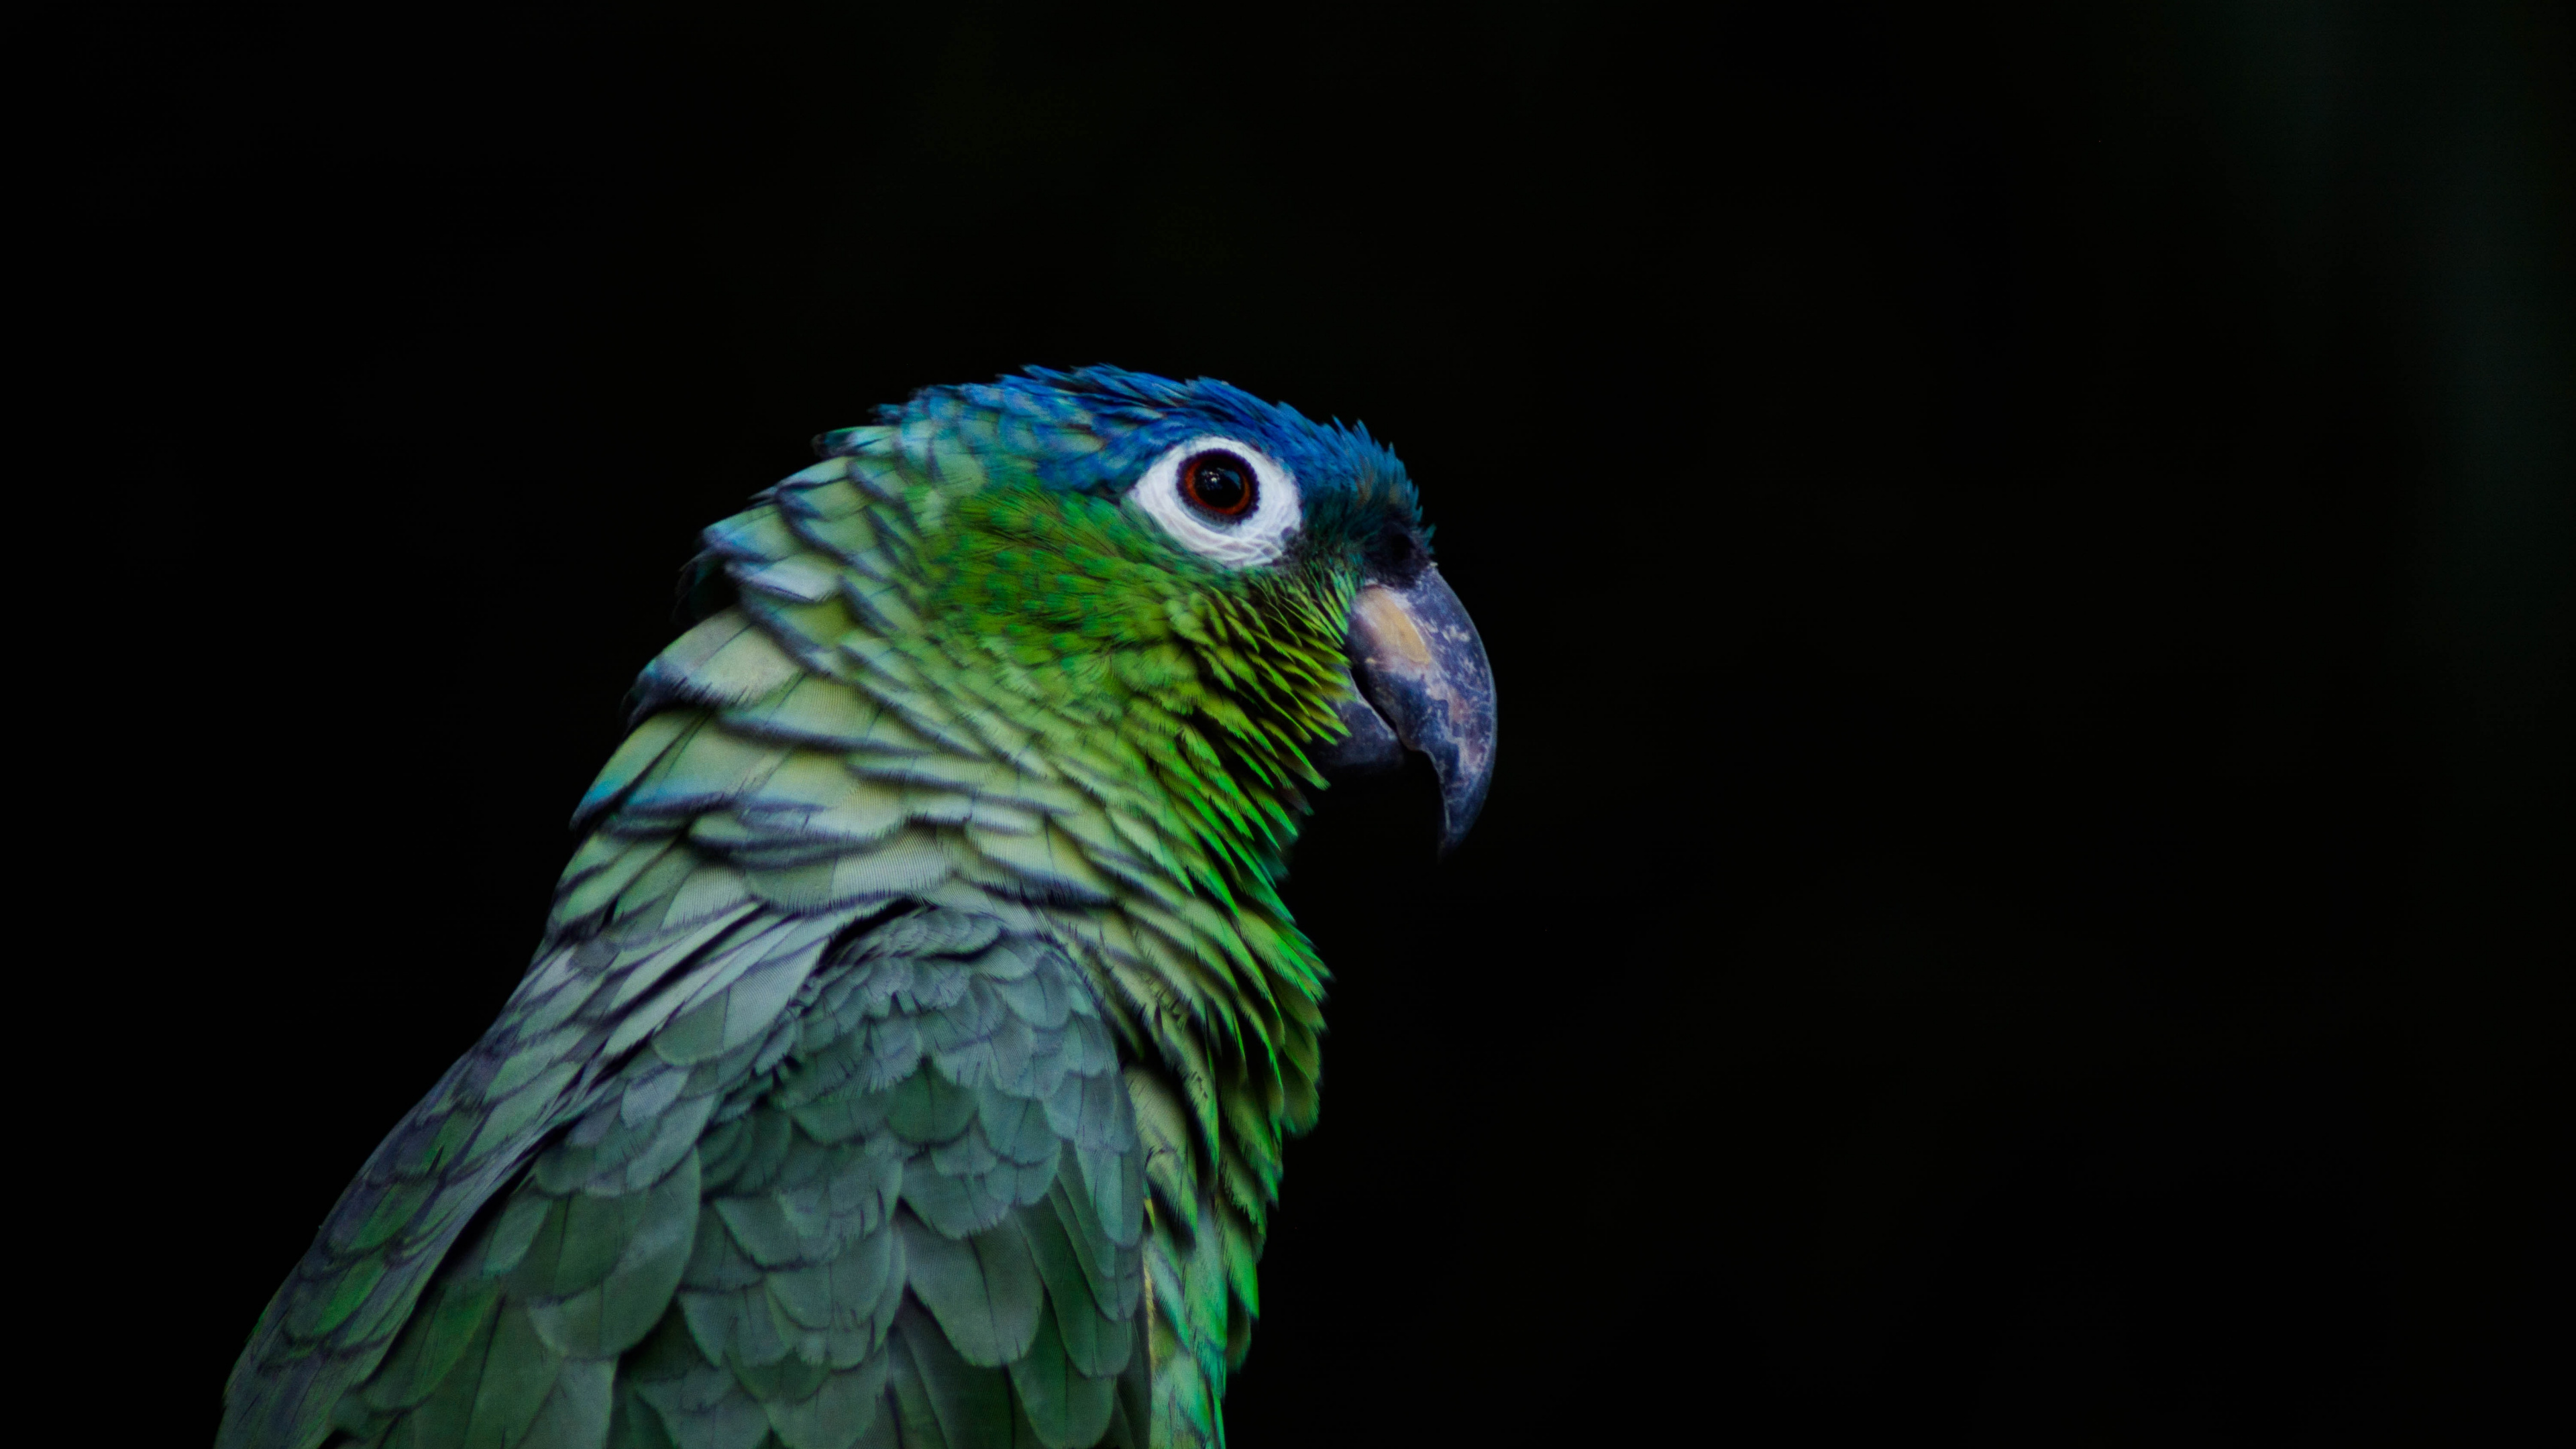 Green and Blue Parrot in Close up Photography. Wallpaper in 3840x2160 Resolution